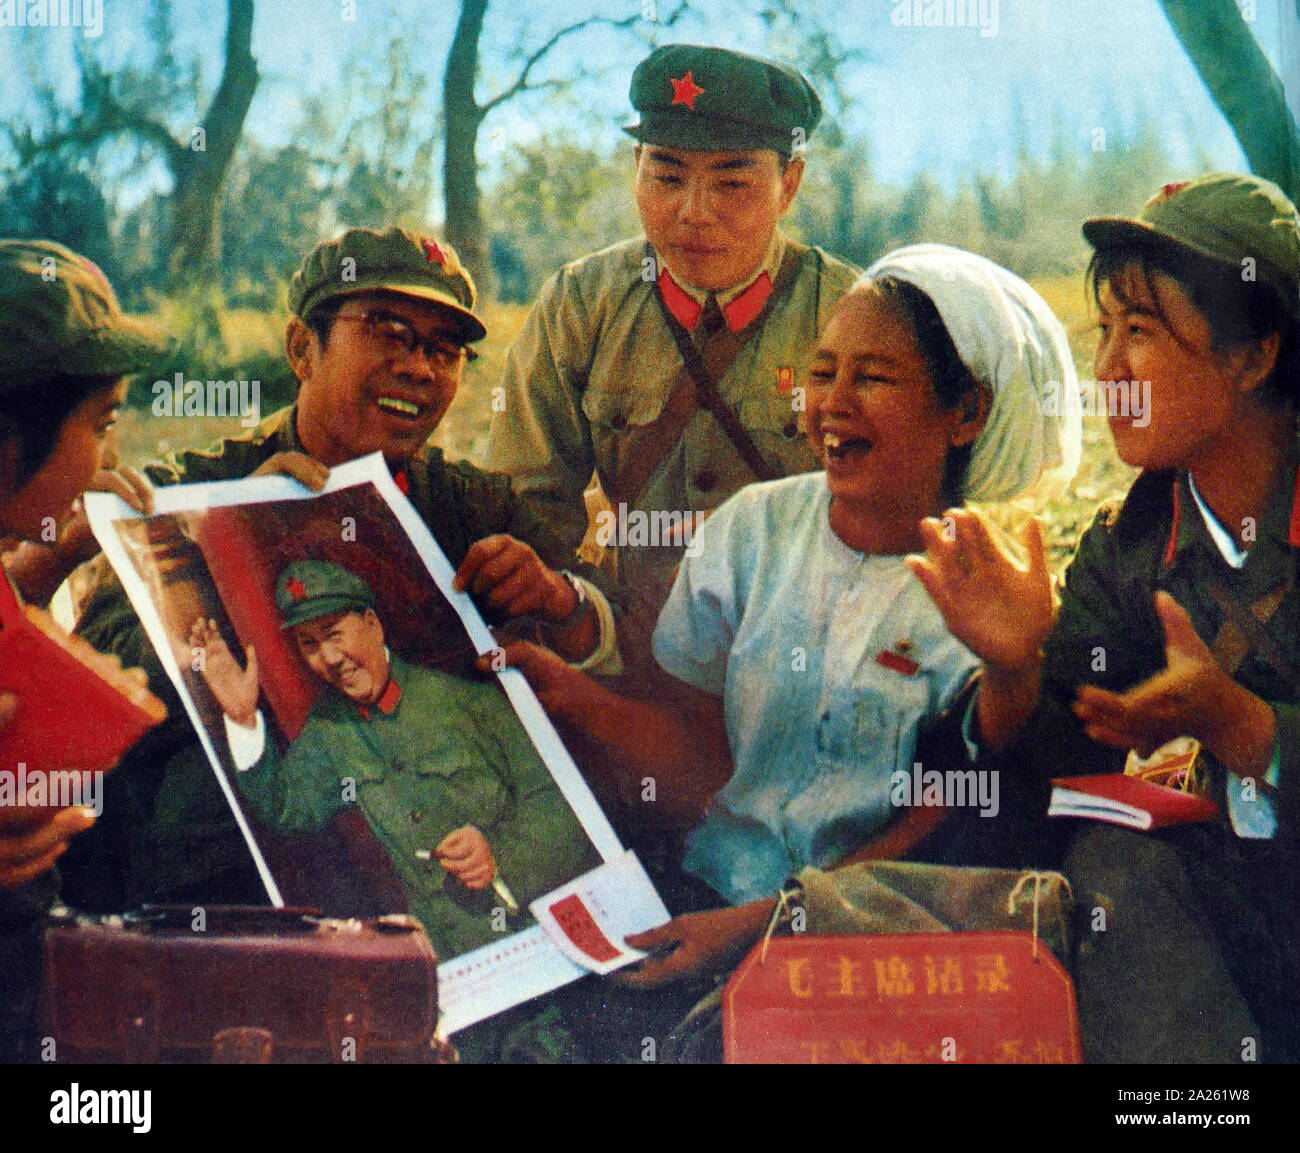 farm workers with soldiers of the People's Liberation Army, during the. Cultural Revolution China 1966 Stock Photo